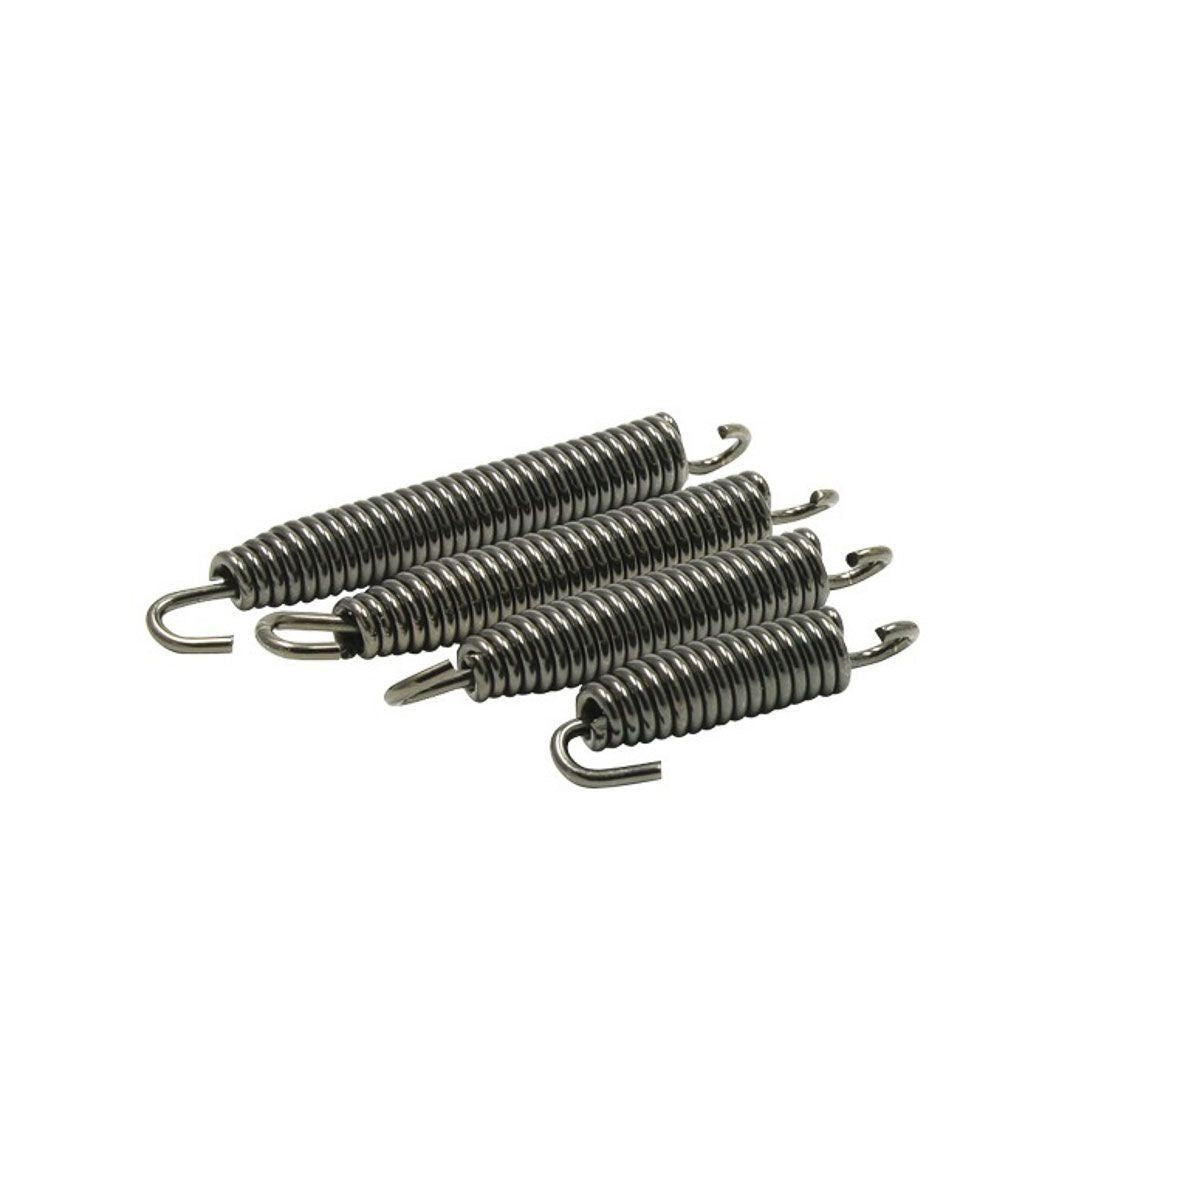 Kartech Exhaust Spring With Swivel Ends 55mm Suit KZ And Rotax